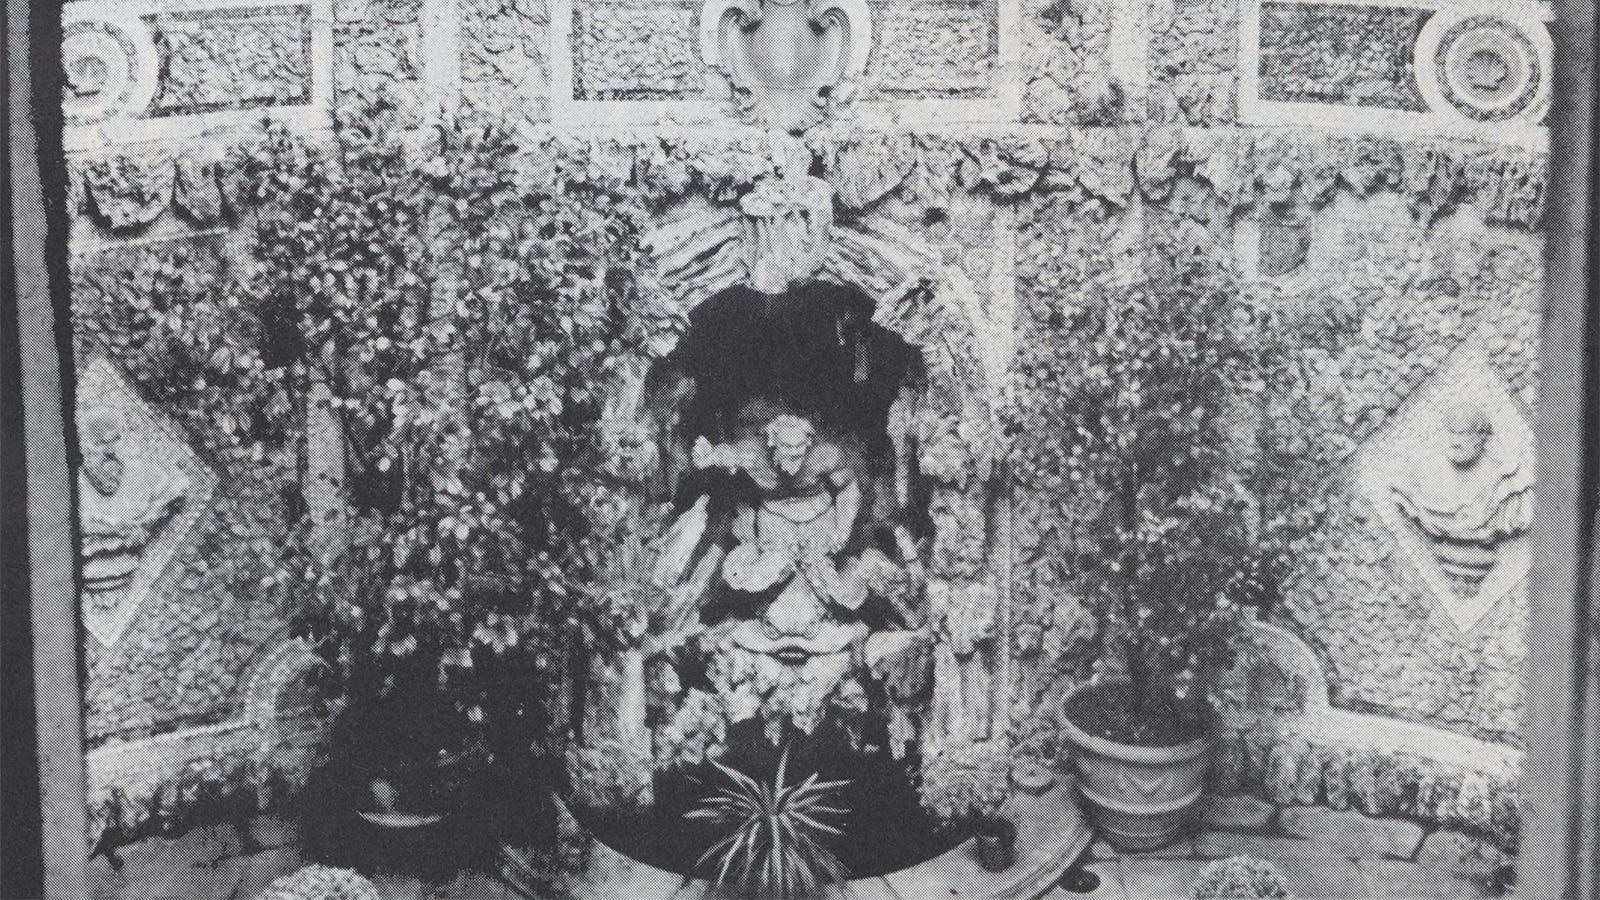 Faded color photo of a yellow wall with a large, grey and white statue of a vase inset near the wall. The vase is surrounded by by green trees with white flowers in an outdoor garden.